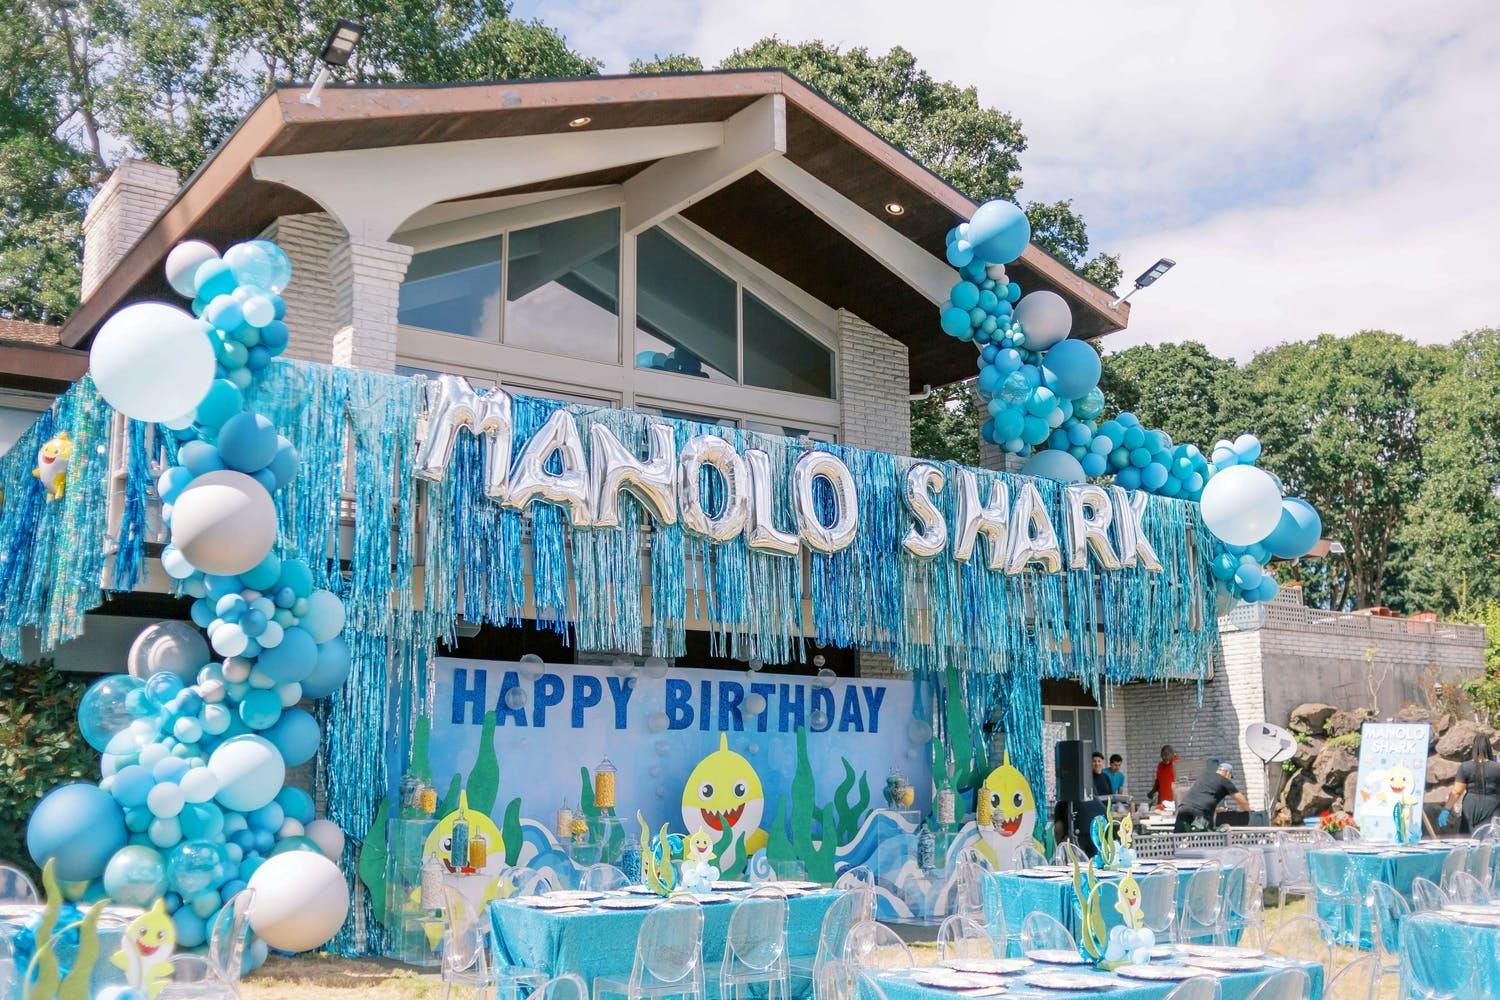 Entire facade of house decorated in blue and silver streamers and balloons for Baby Shark themed birthday party | PartySlate